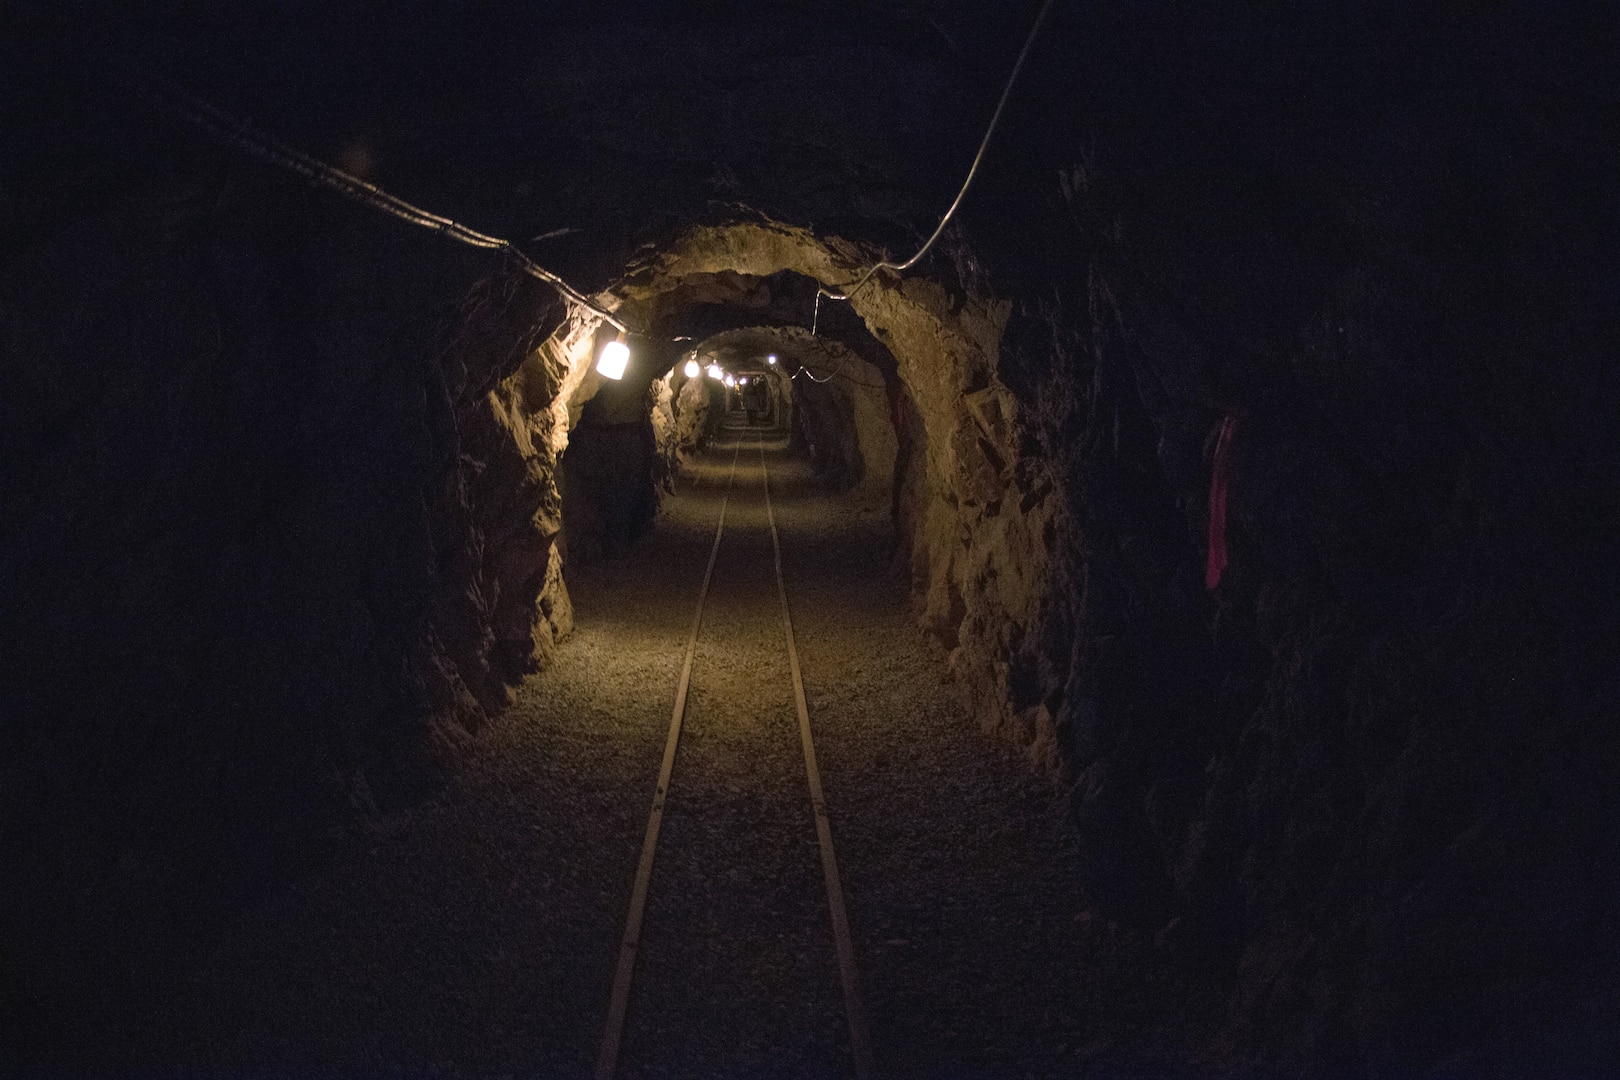 The DARPA Subterranean Challenge explores innovative approaches and new technologies to rapidly map, navigate, and search complex underground
environments, Edgar Experimental Mine, April 2019 (DARPA/Colorado School of Mines)